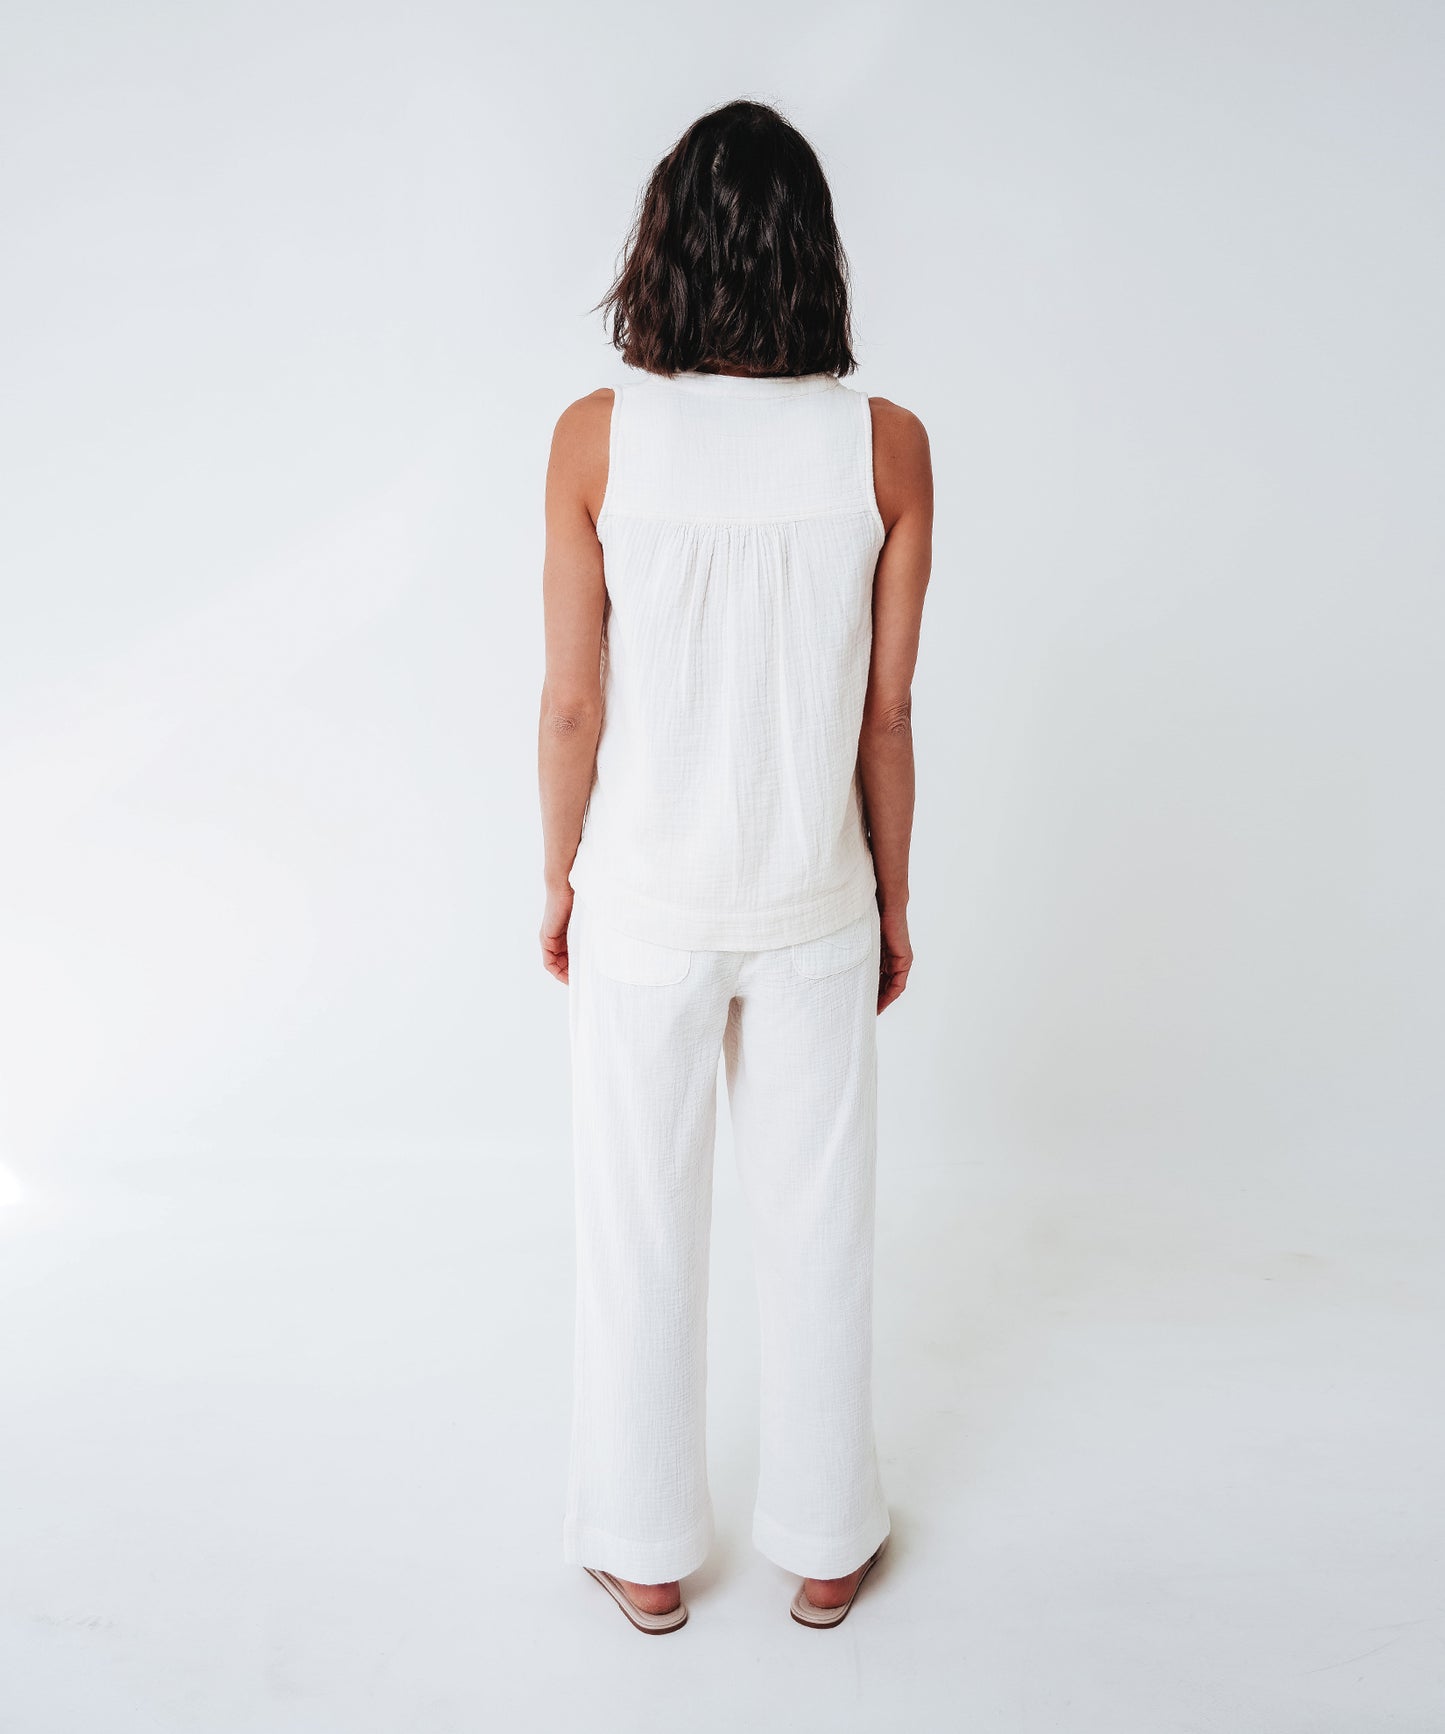 Supersoft Gauze Beach Pant in color Cream on a model